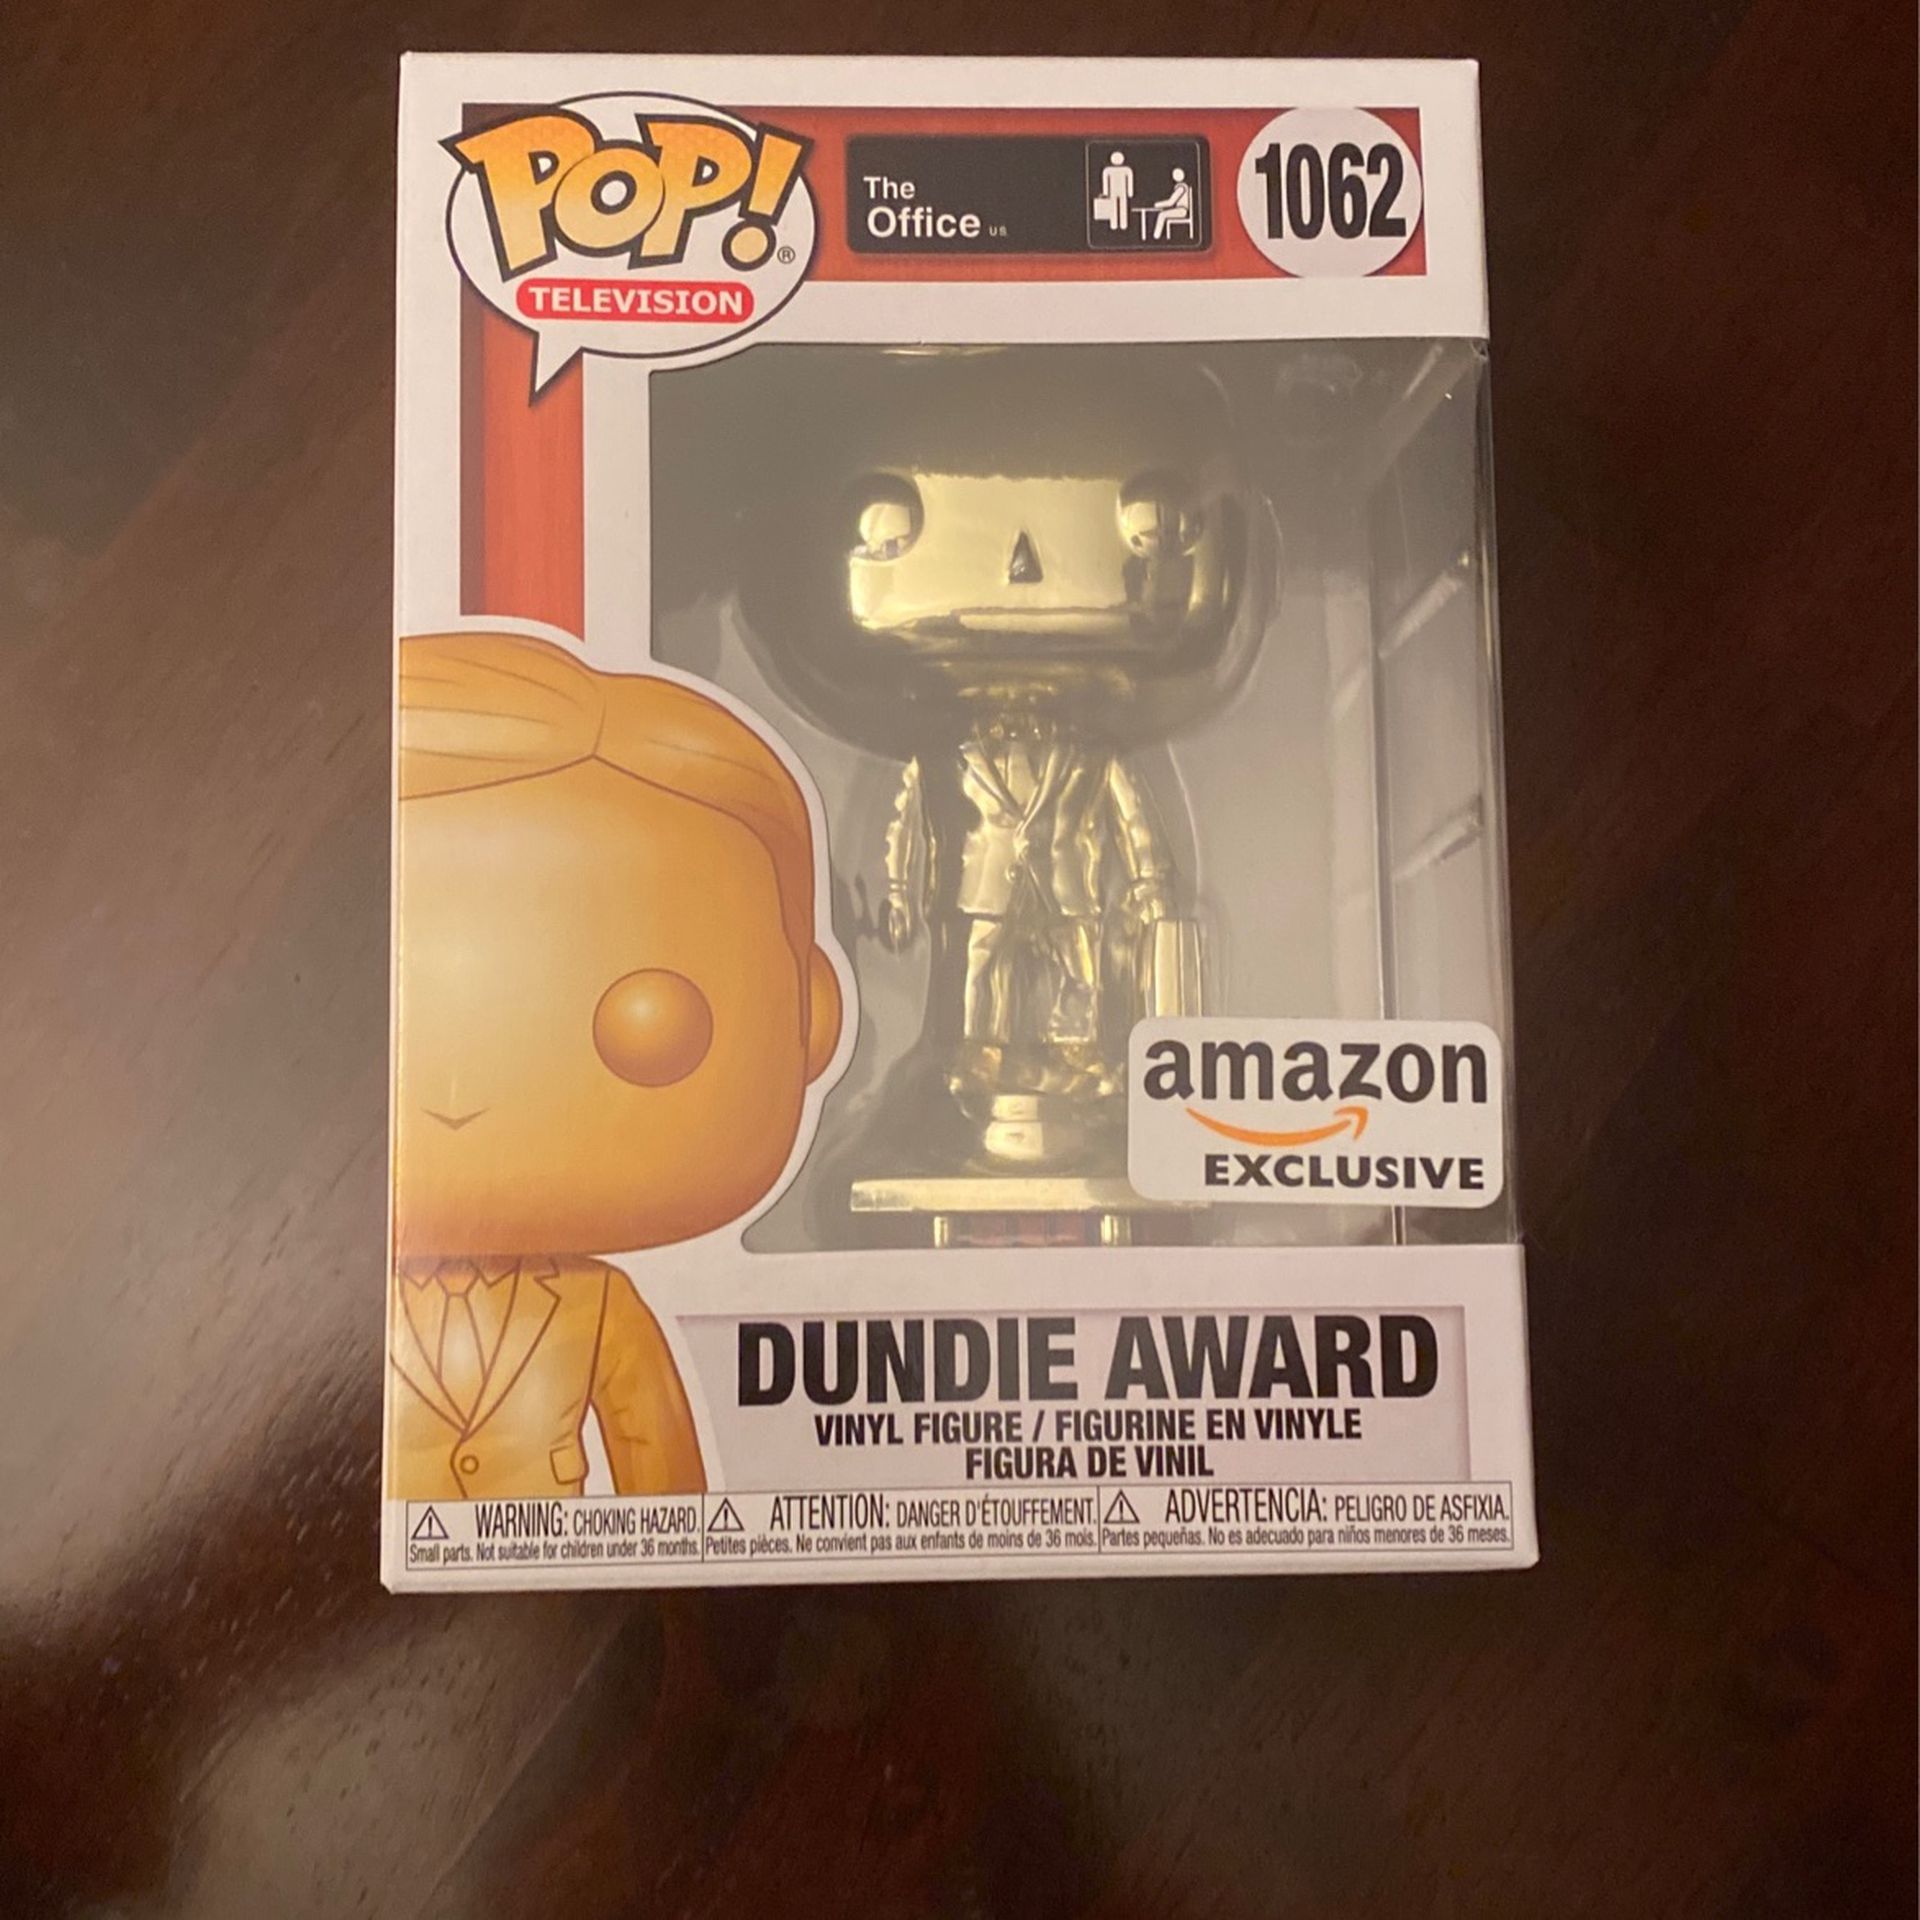 PoP Television “the Office - Dundie award” 1062